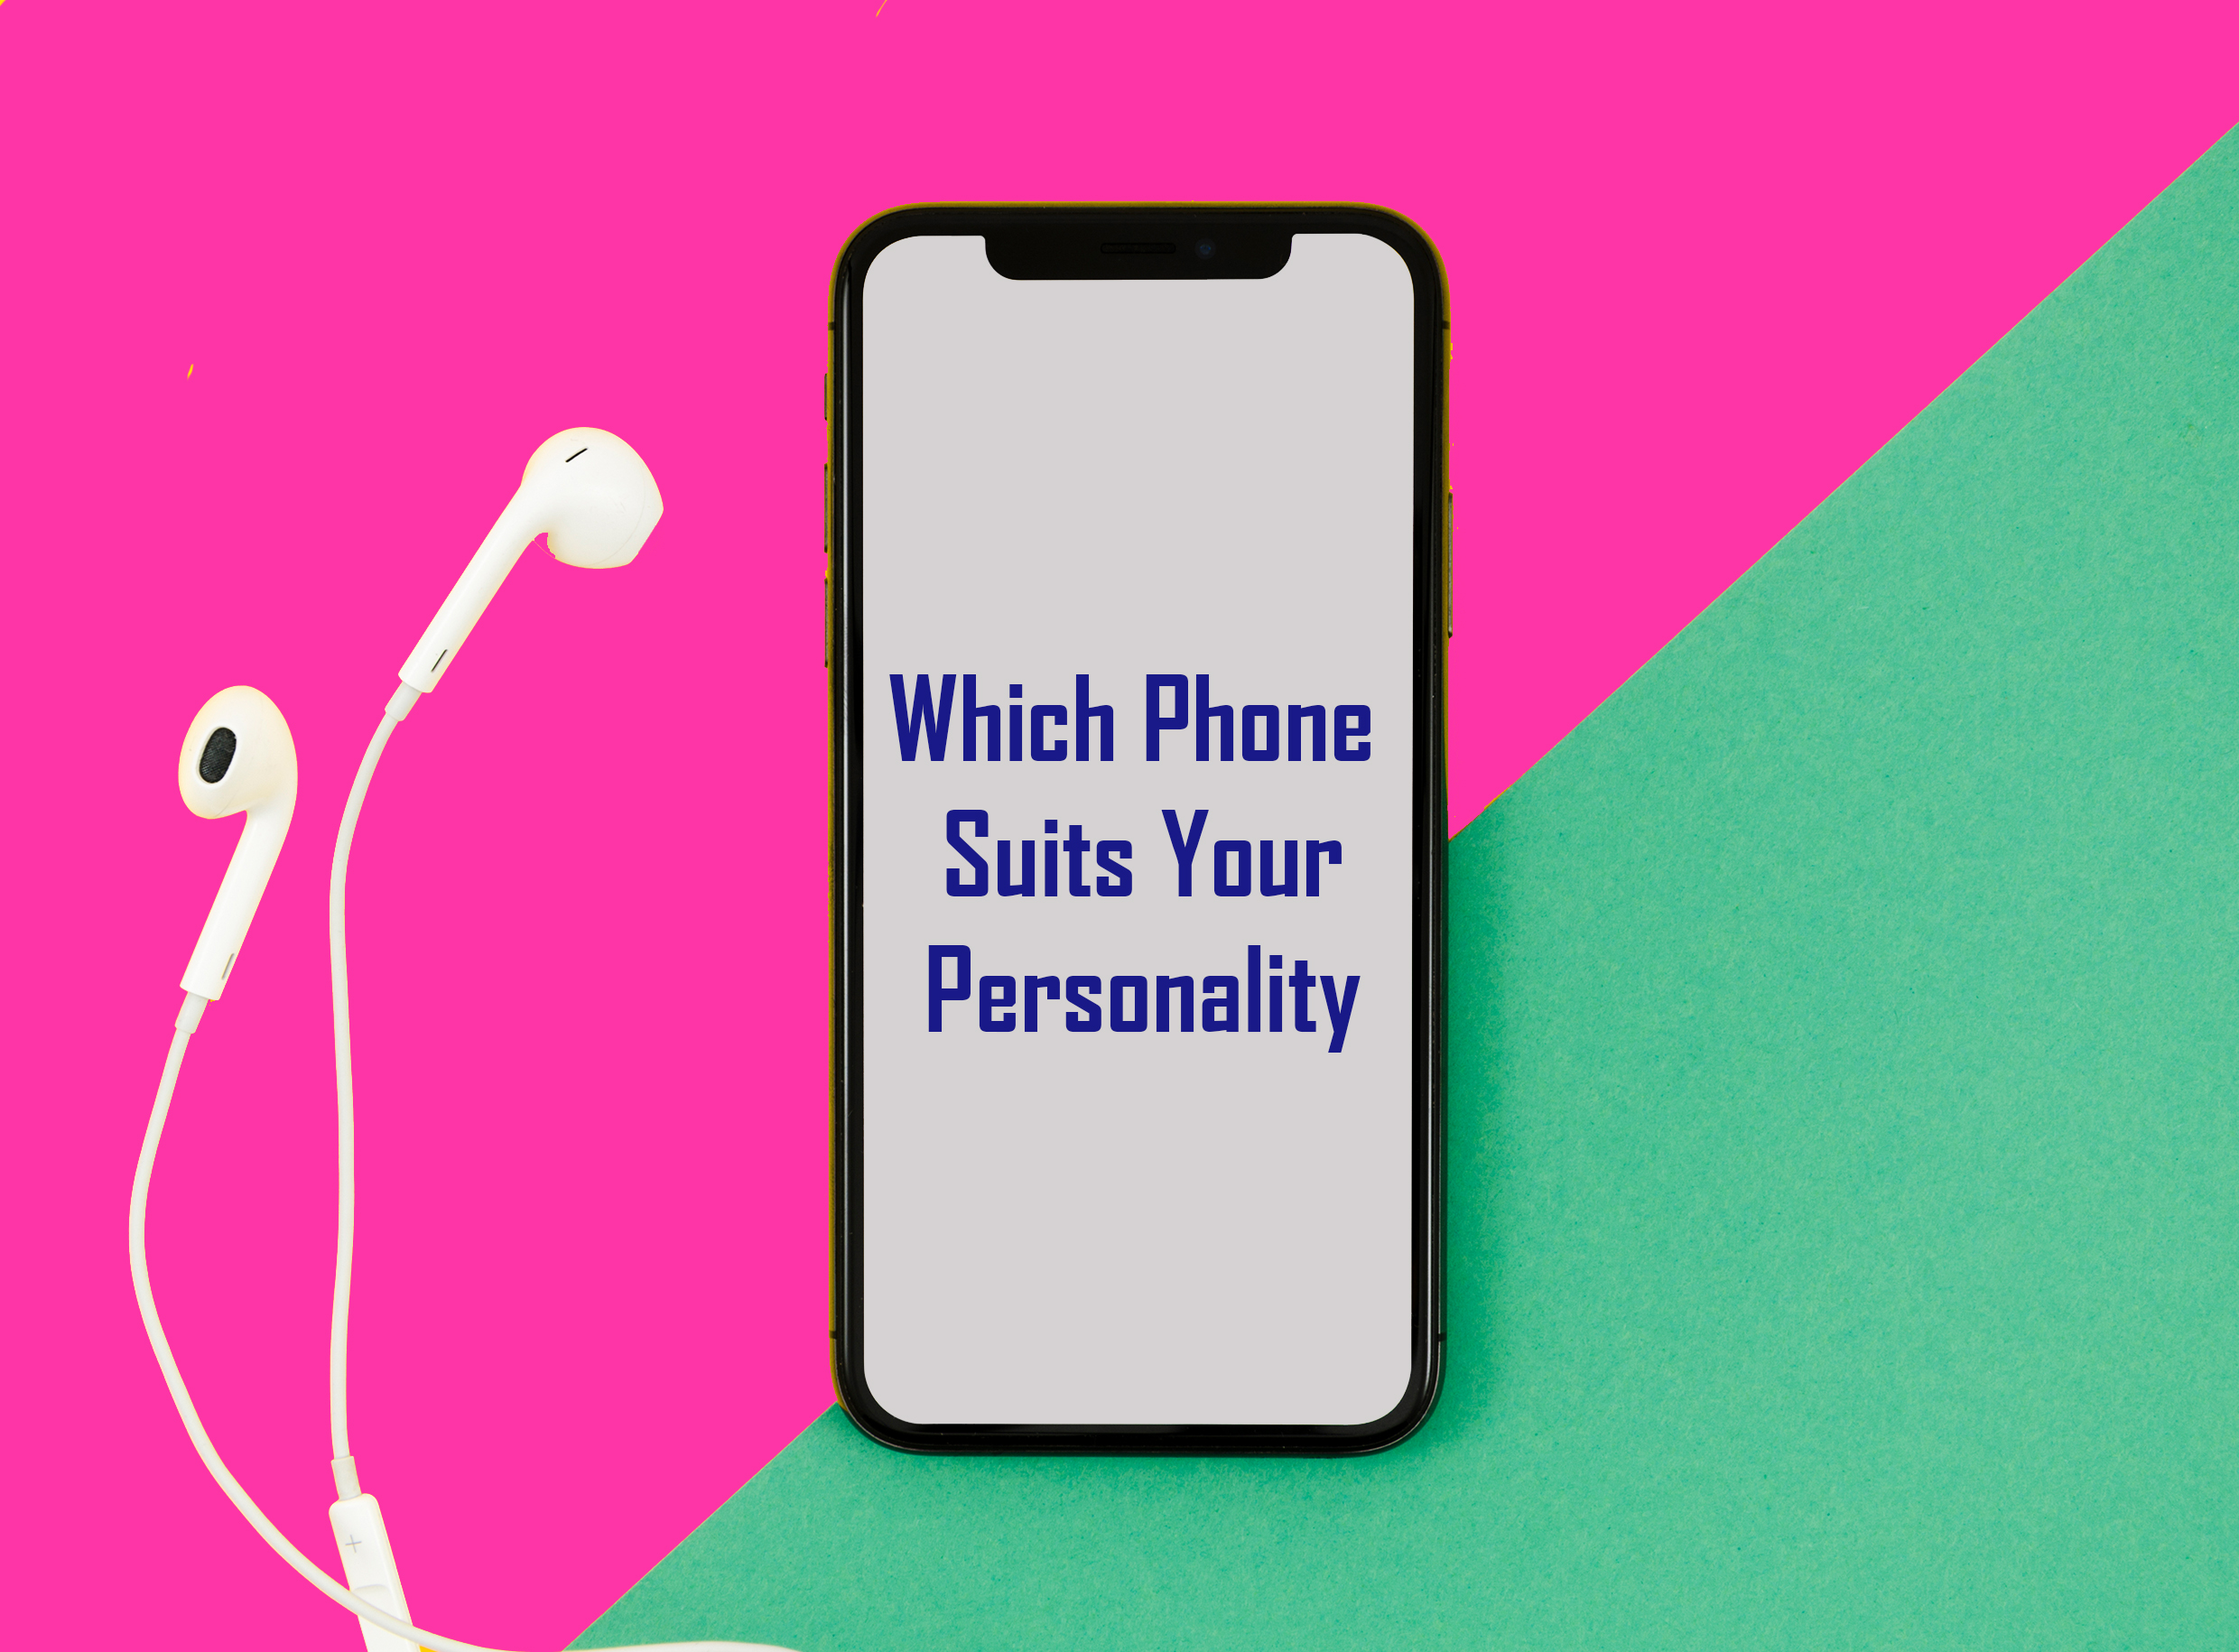  Answer These Questions and We’ll Tell You Which Phone Best Suits Your Personality